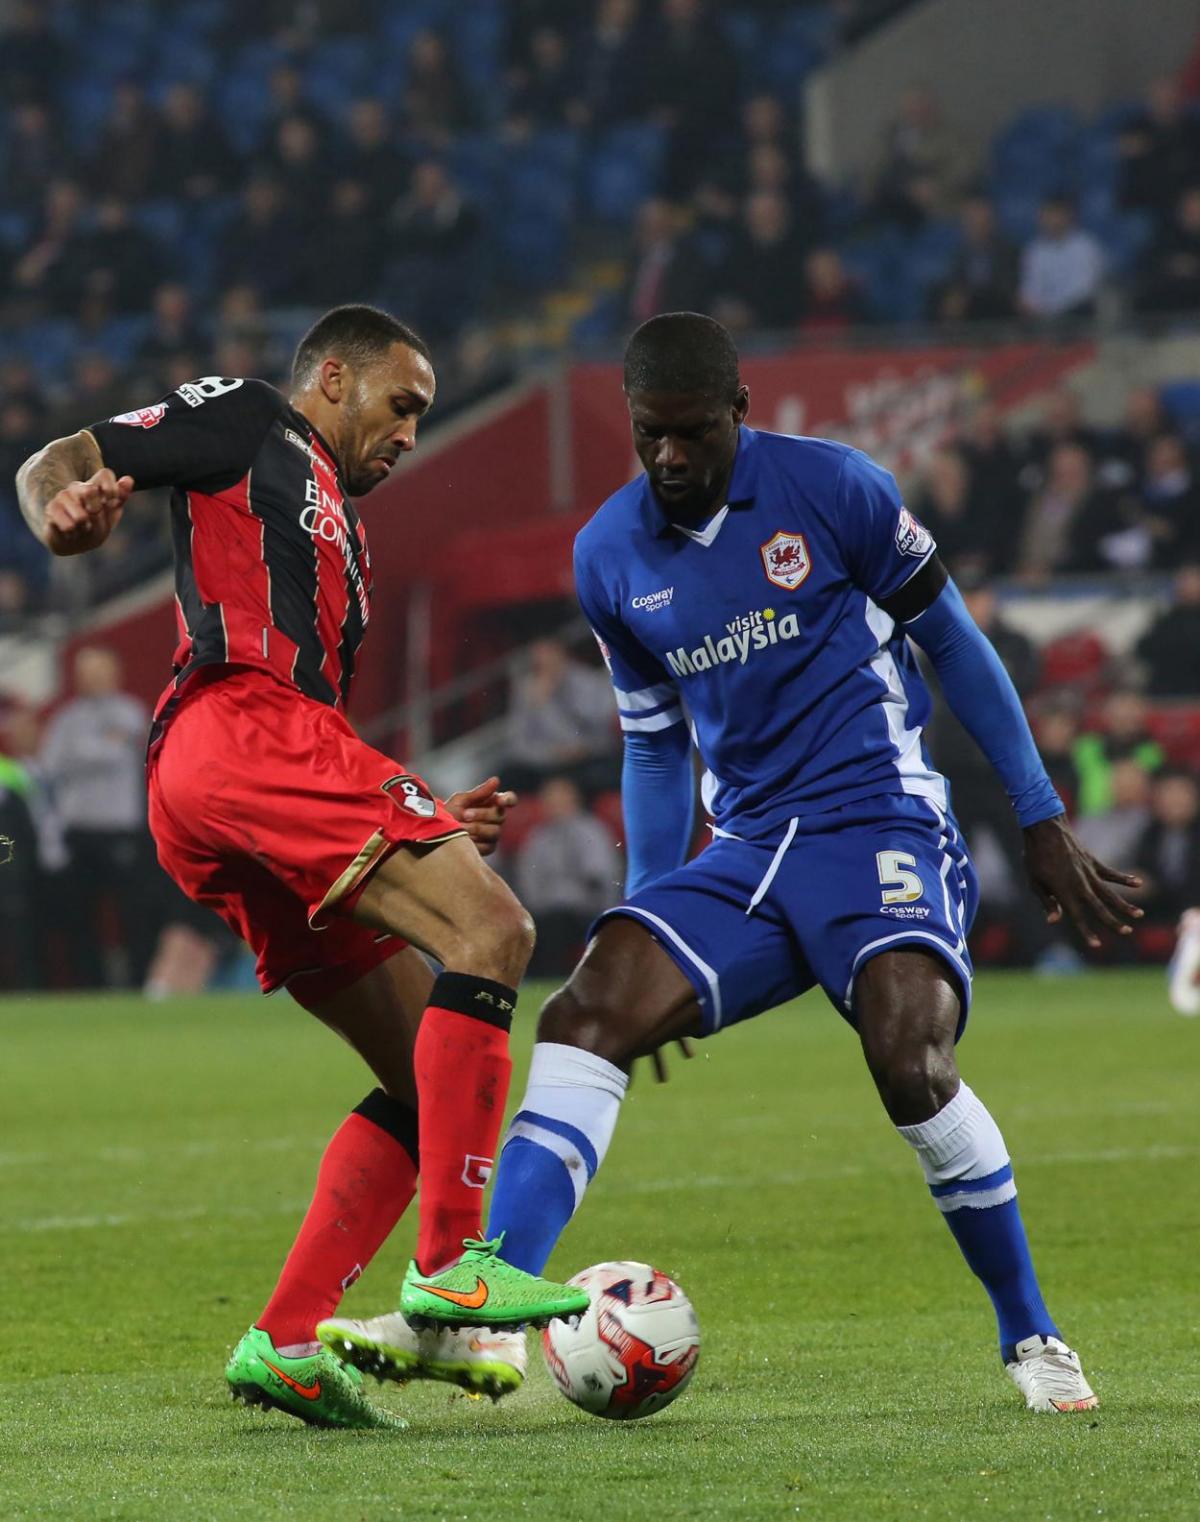 All the pictures of Cardiff City v AFC Bournemouth on Tuesday March 17, 2015 by Richard Crease